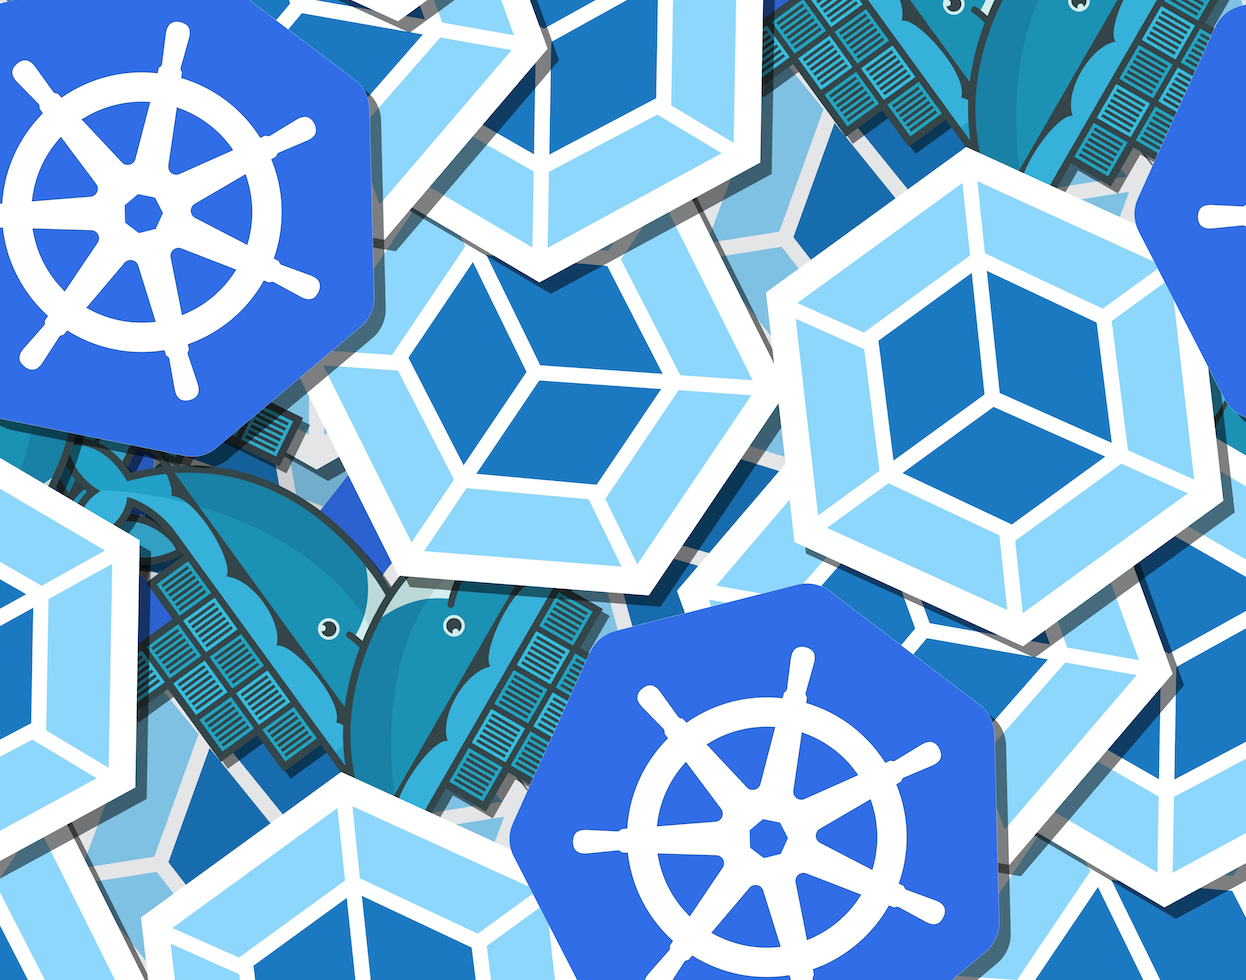 Carbon Relay Raises $63M to Improve Application Performance on Kubernetes